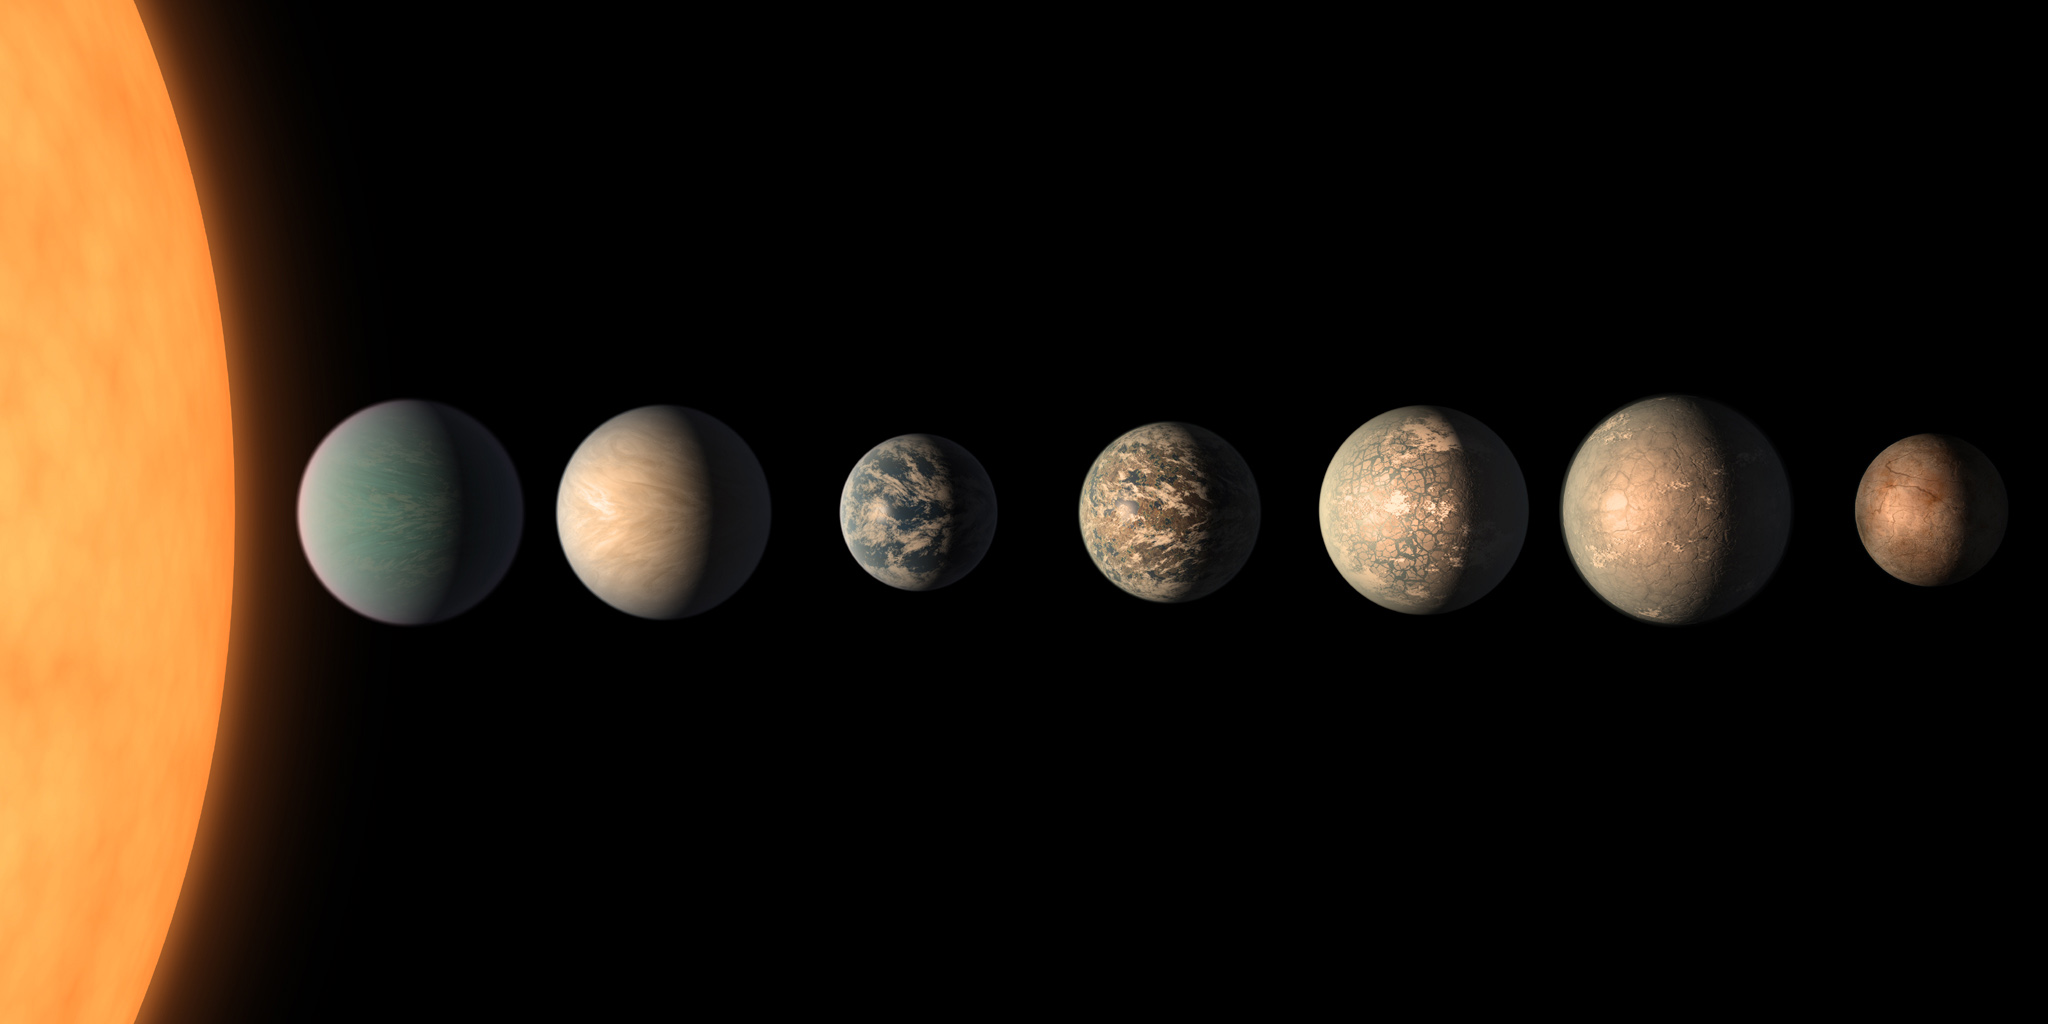 Artist's impression of the Trappist 1 system